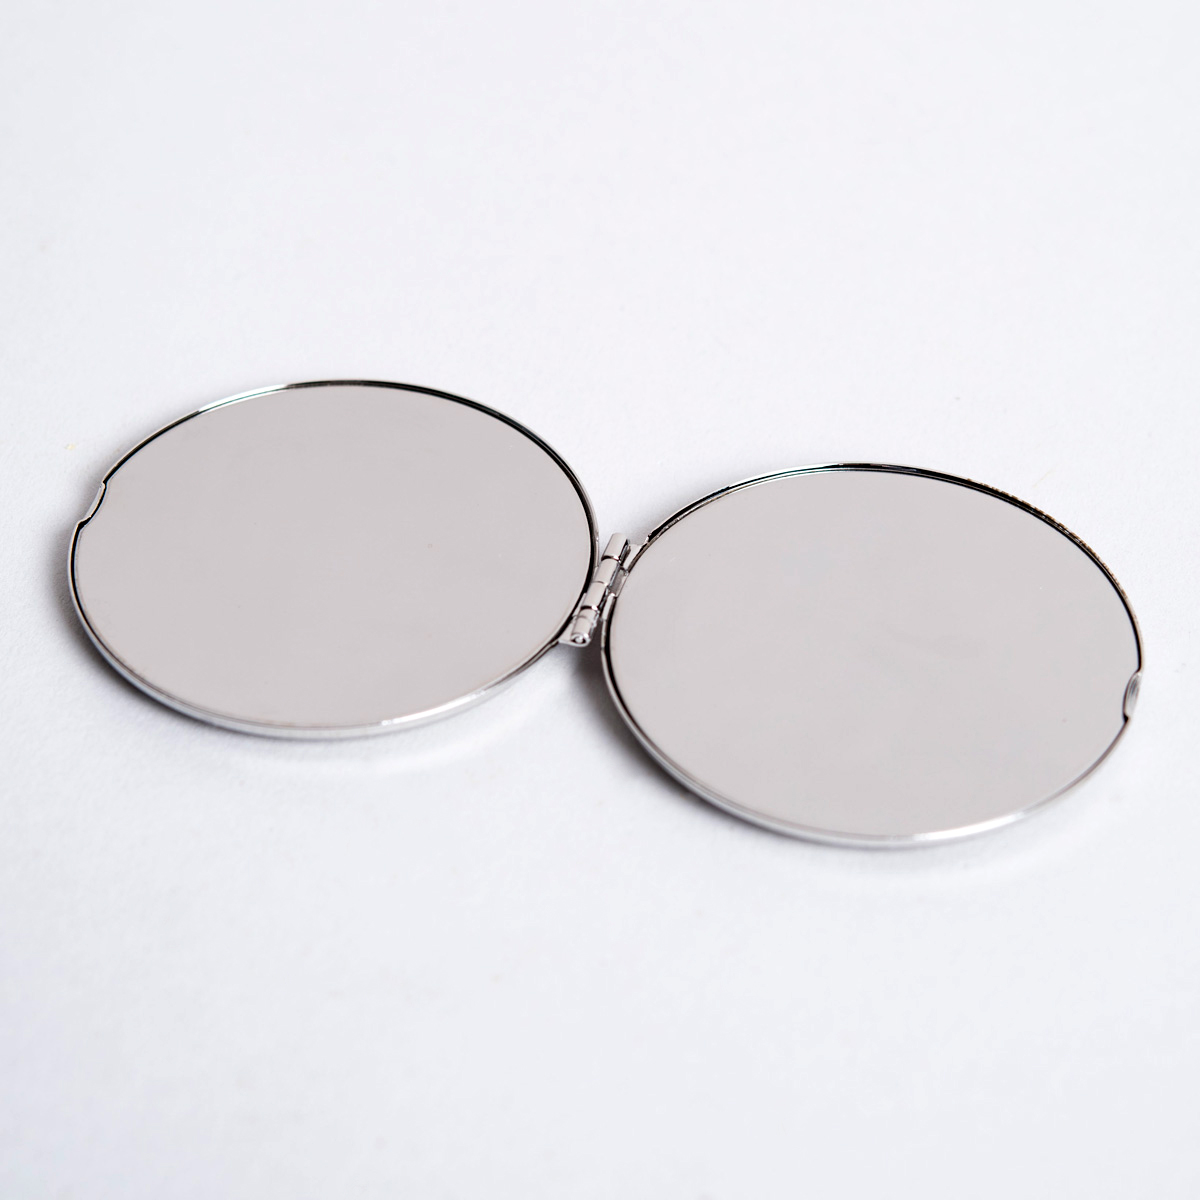 Engraved Silver Round Compact Mirror - Floral